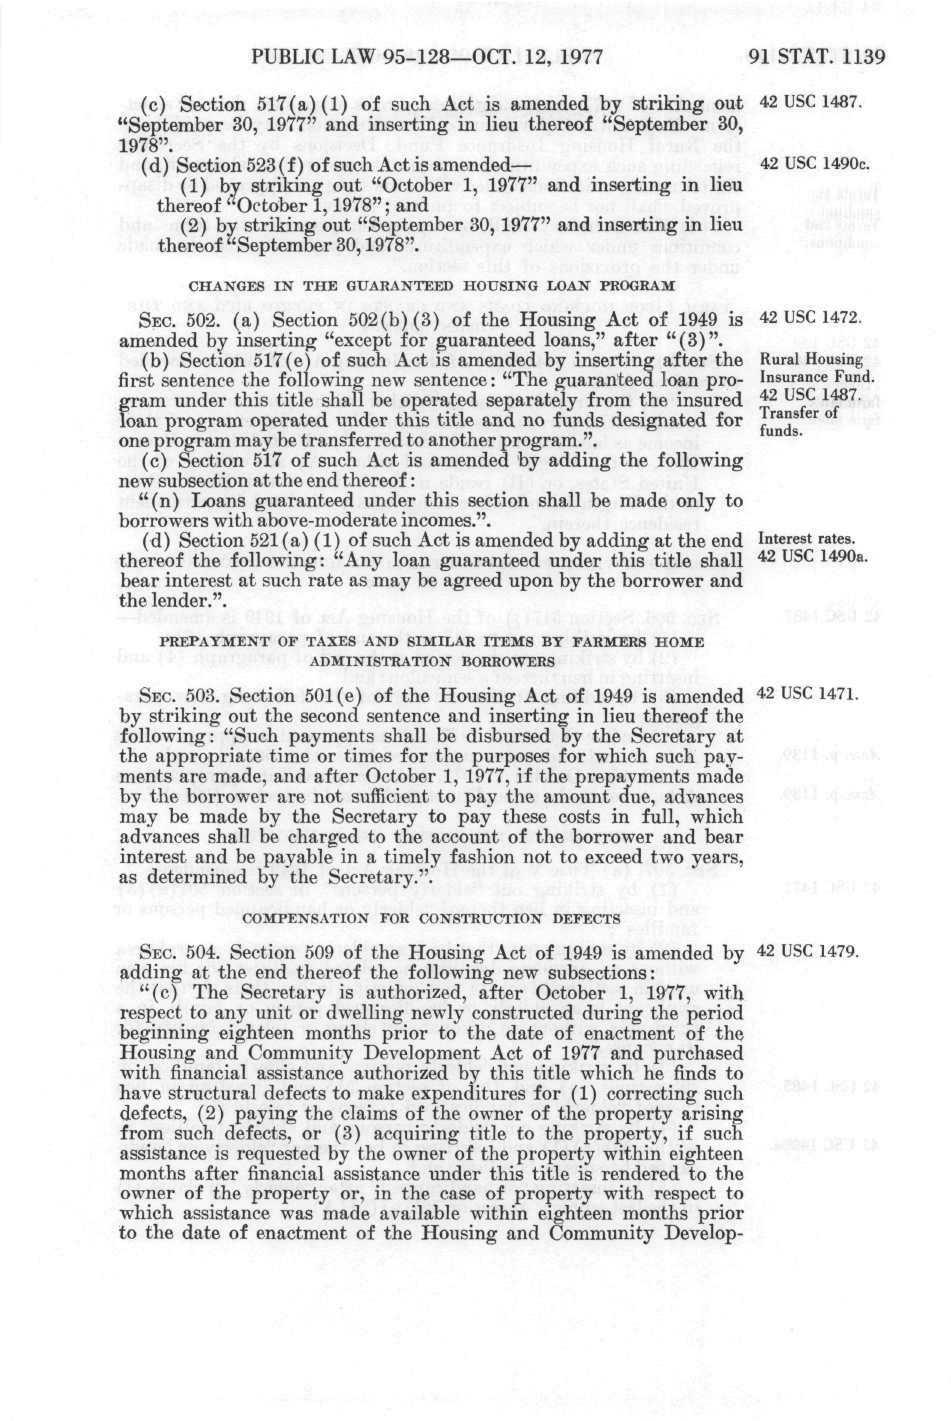 PUBLIC LAW 95-128 OCT. 12, 1977 91 STAT. 1139 (c) Section 517(a)(1) of such Act is amended by striking out "September 30, 1977" and inserting in lieu thereof "September 30, 1978".